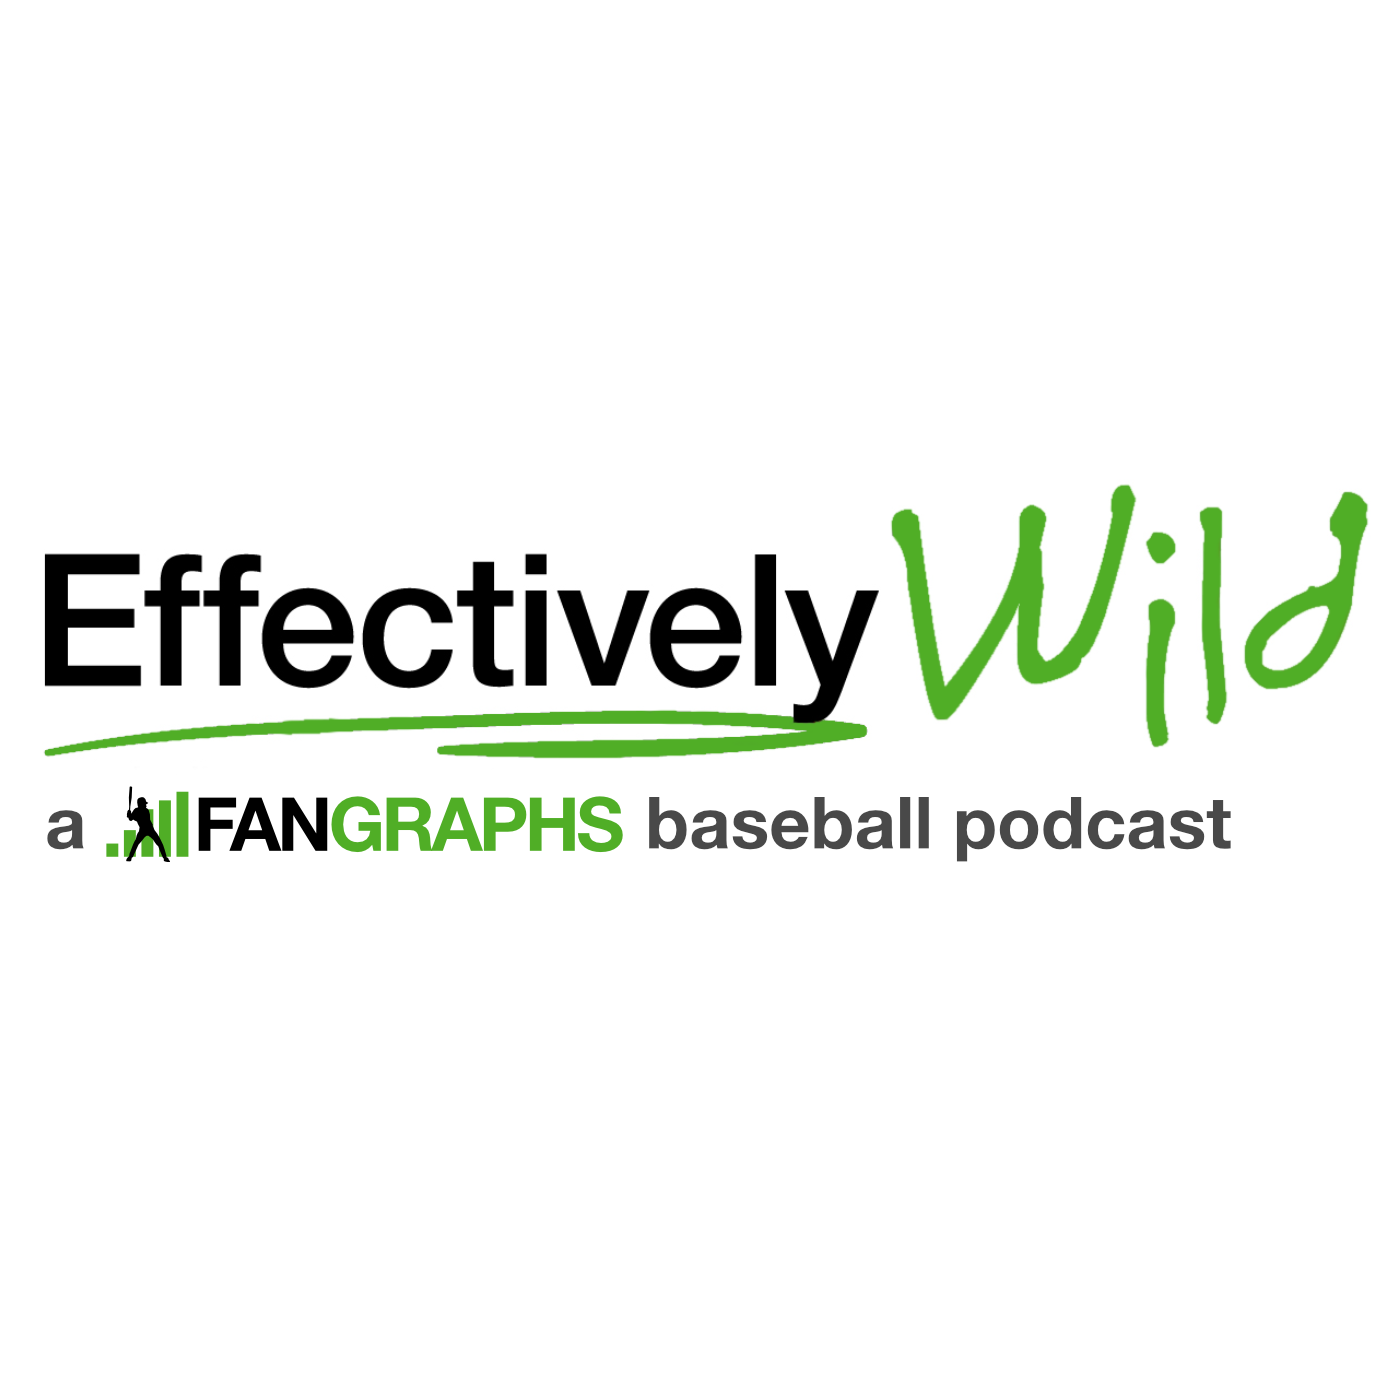 A highlight from Effectively Wild Episode 2008: Big Hack Attack